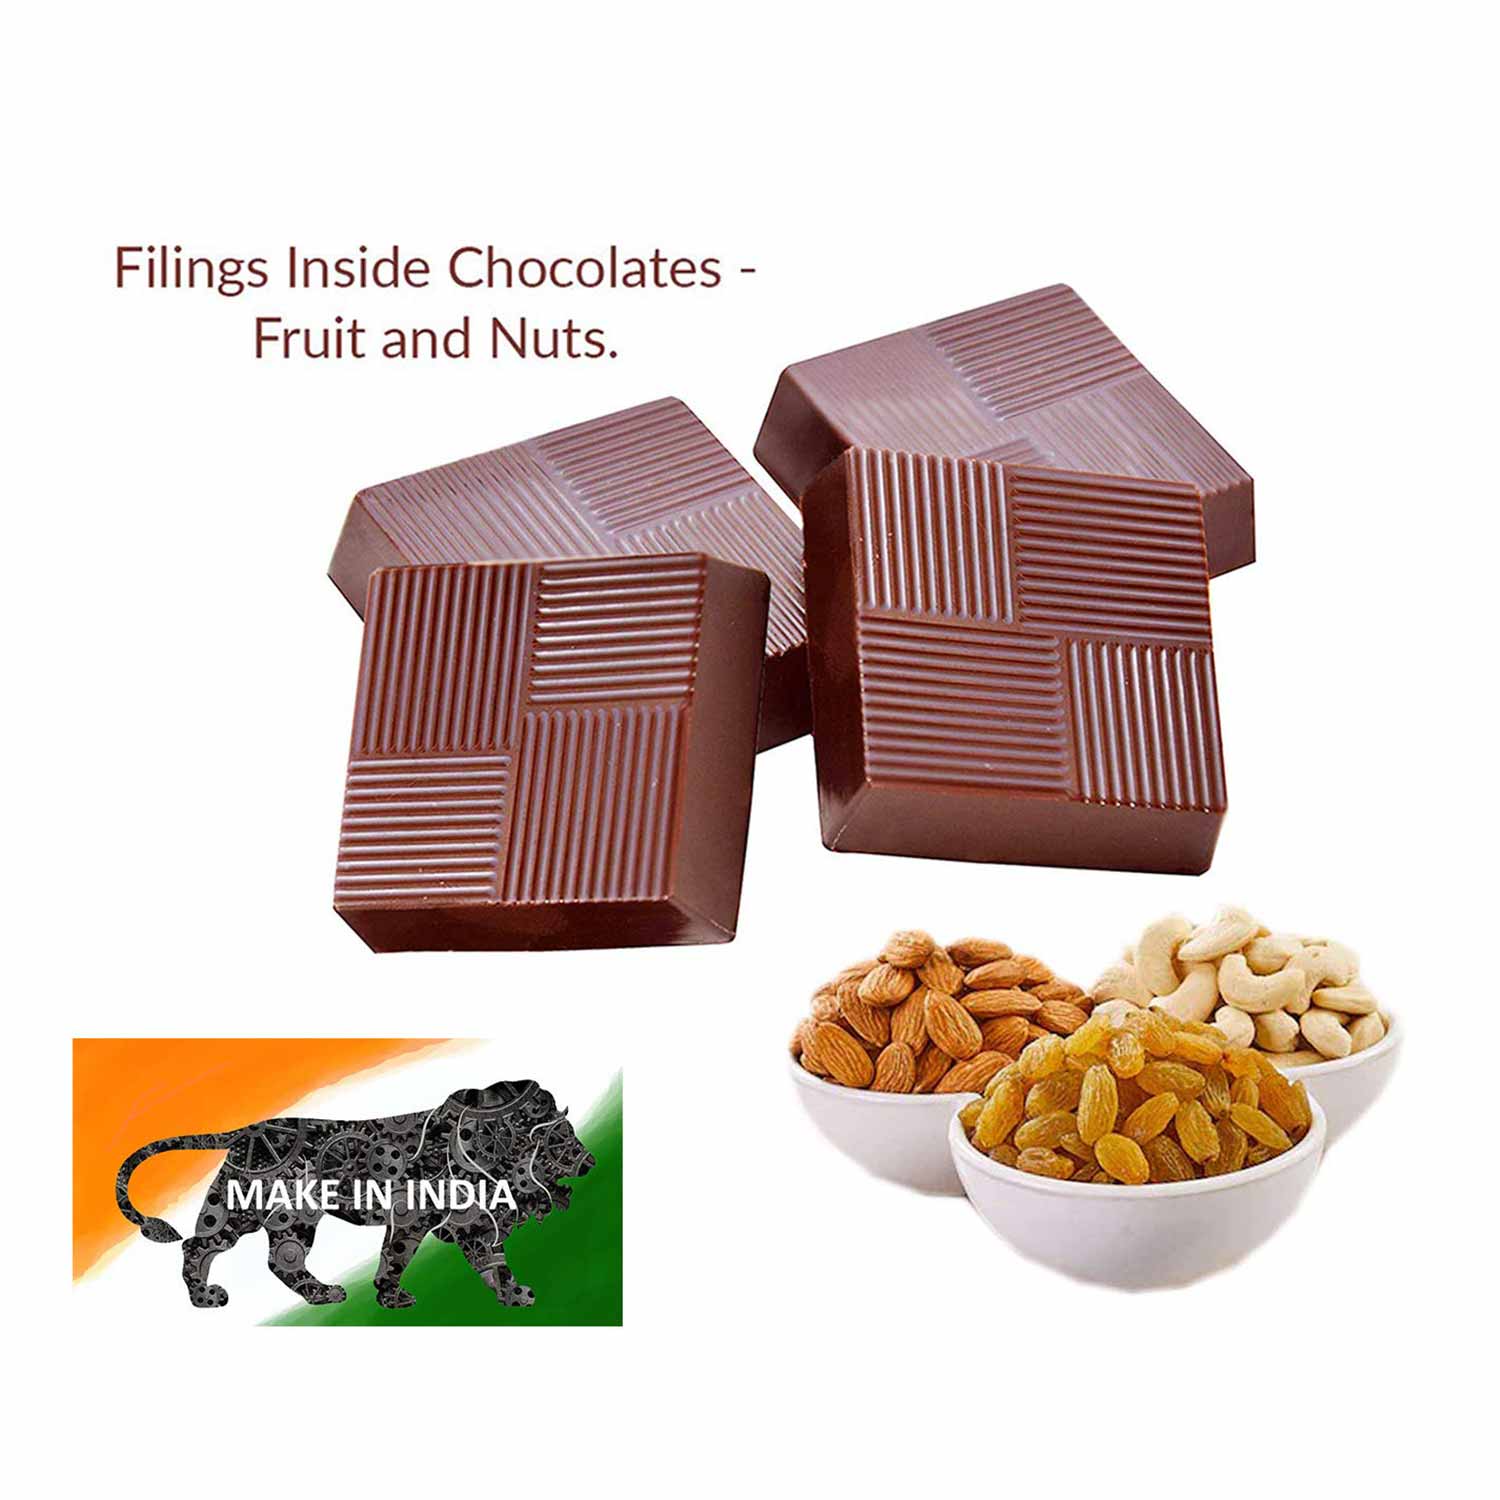 Name and photo Printed Customised Chocolate Wrappers